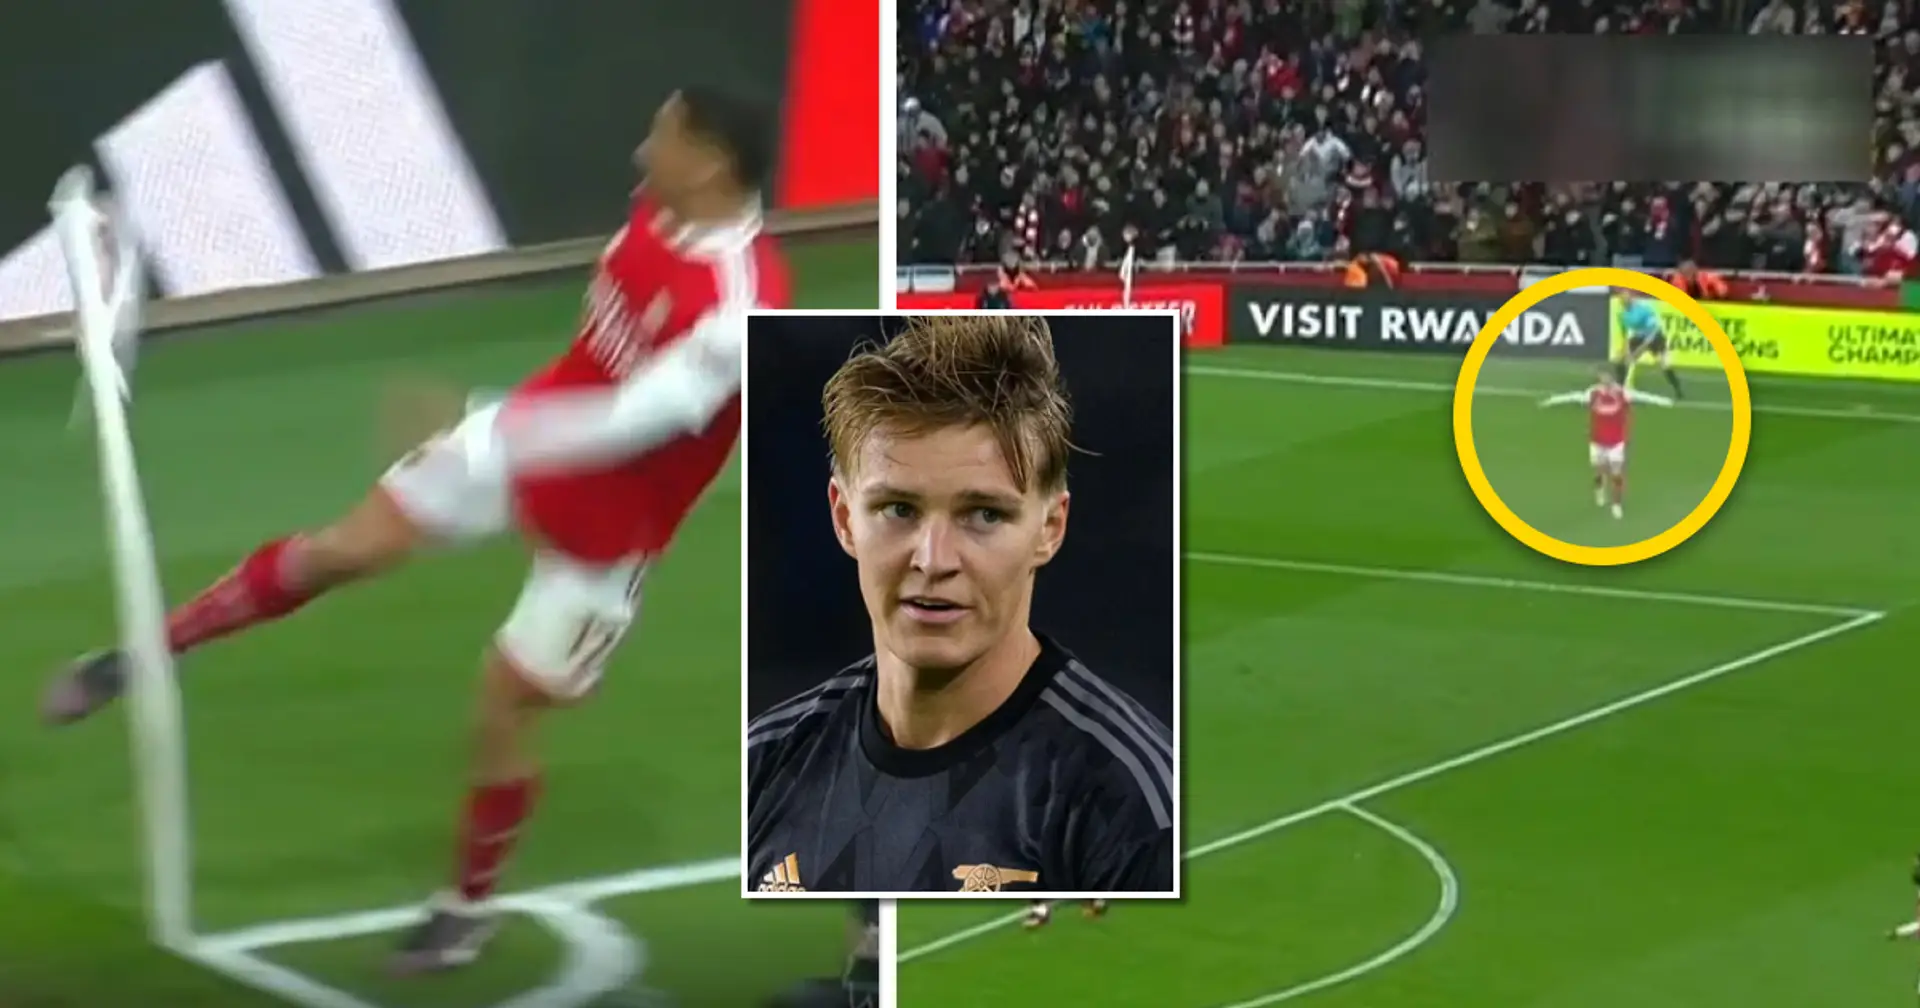 What Odegaard did after Nelson killed Bournemouth and City fans' hopes — he took the corner